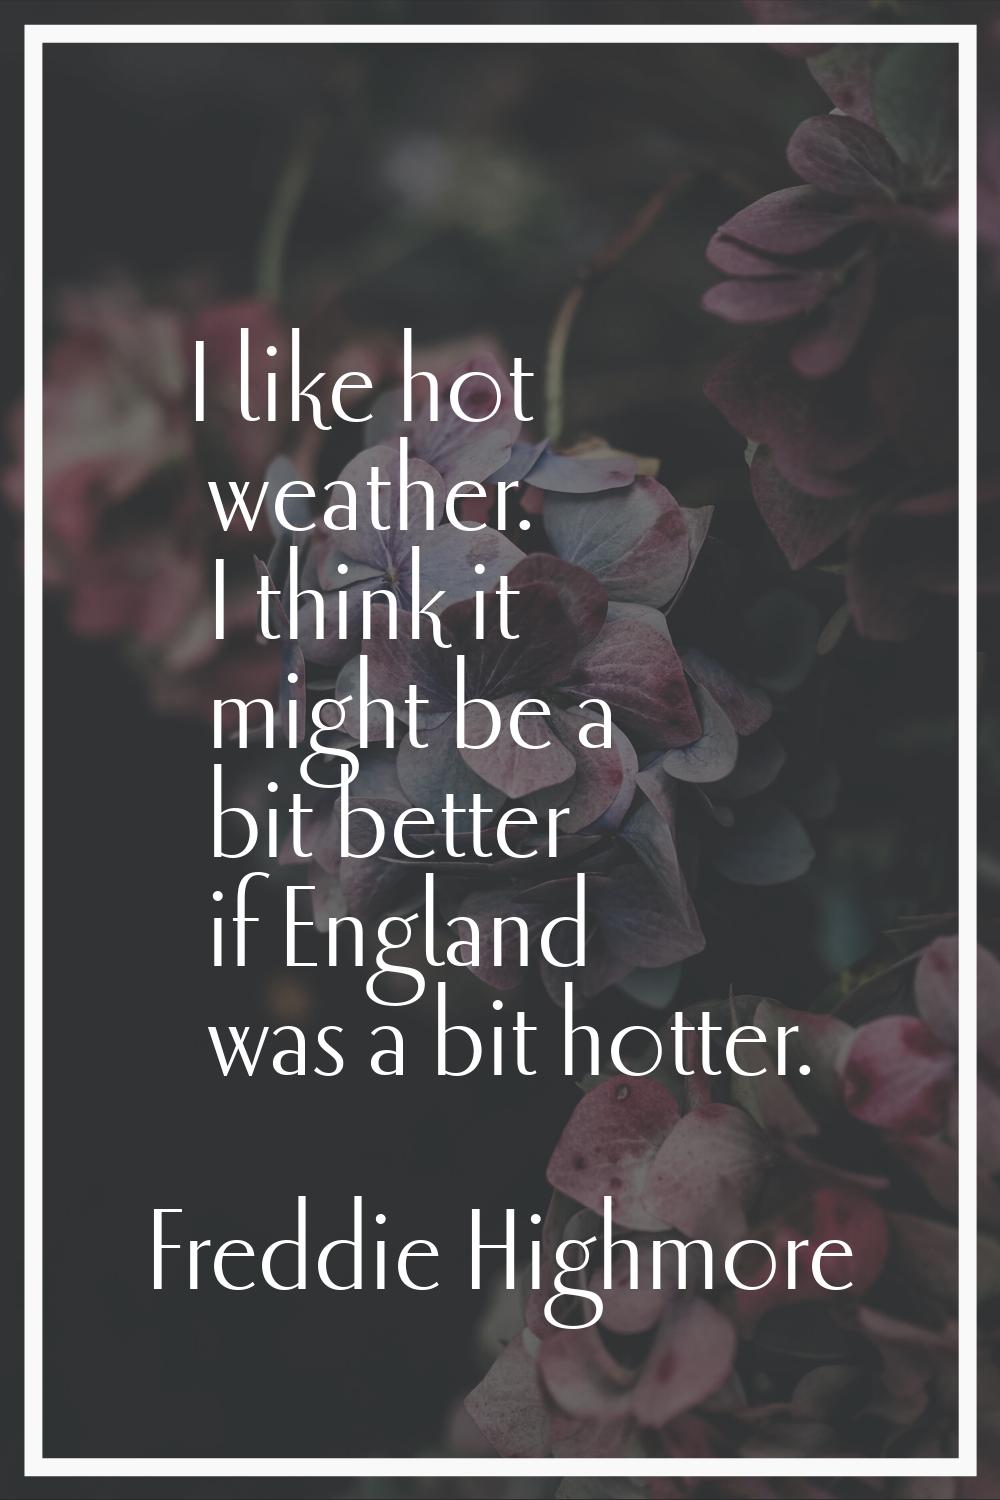 I like hot weather. I think it might be a bit better if England was a bit hotter.